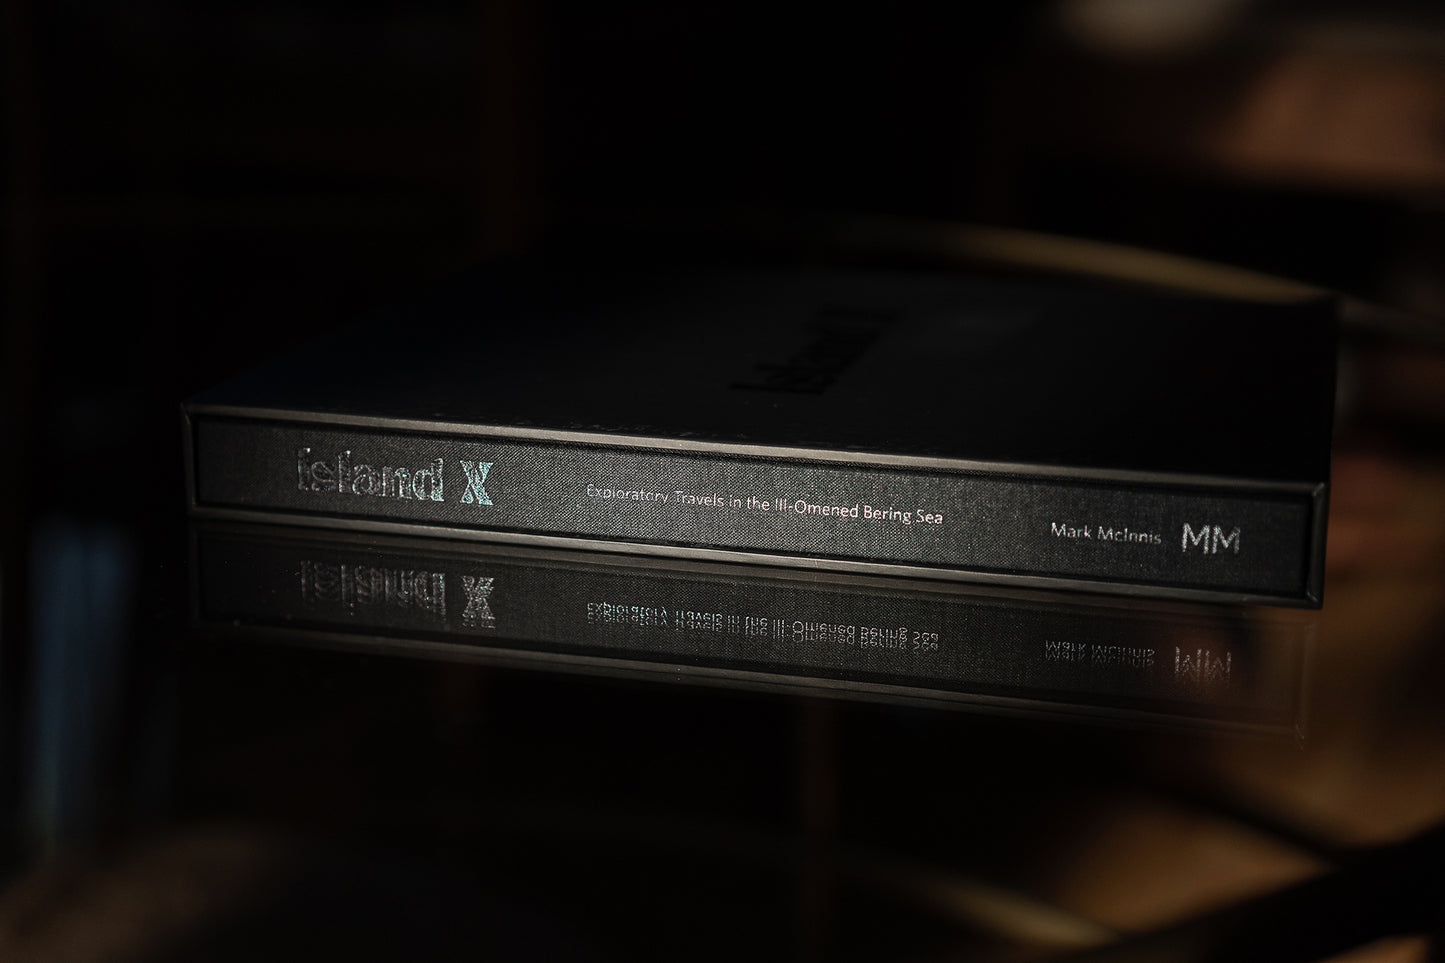 Island X- A photography book by Mark McInnis- Limited edition with fabric spine and black slip case- close up on the books spine.